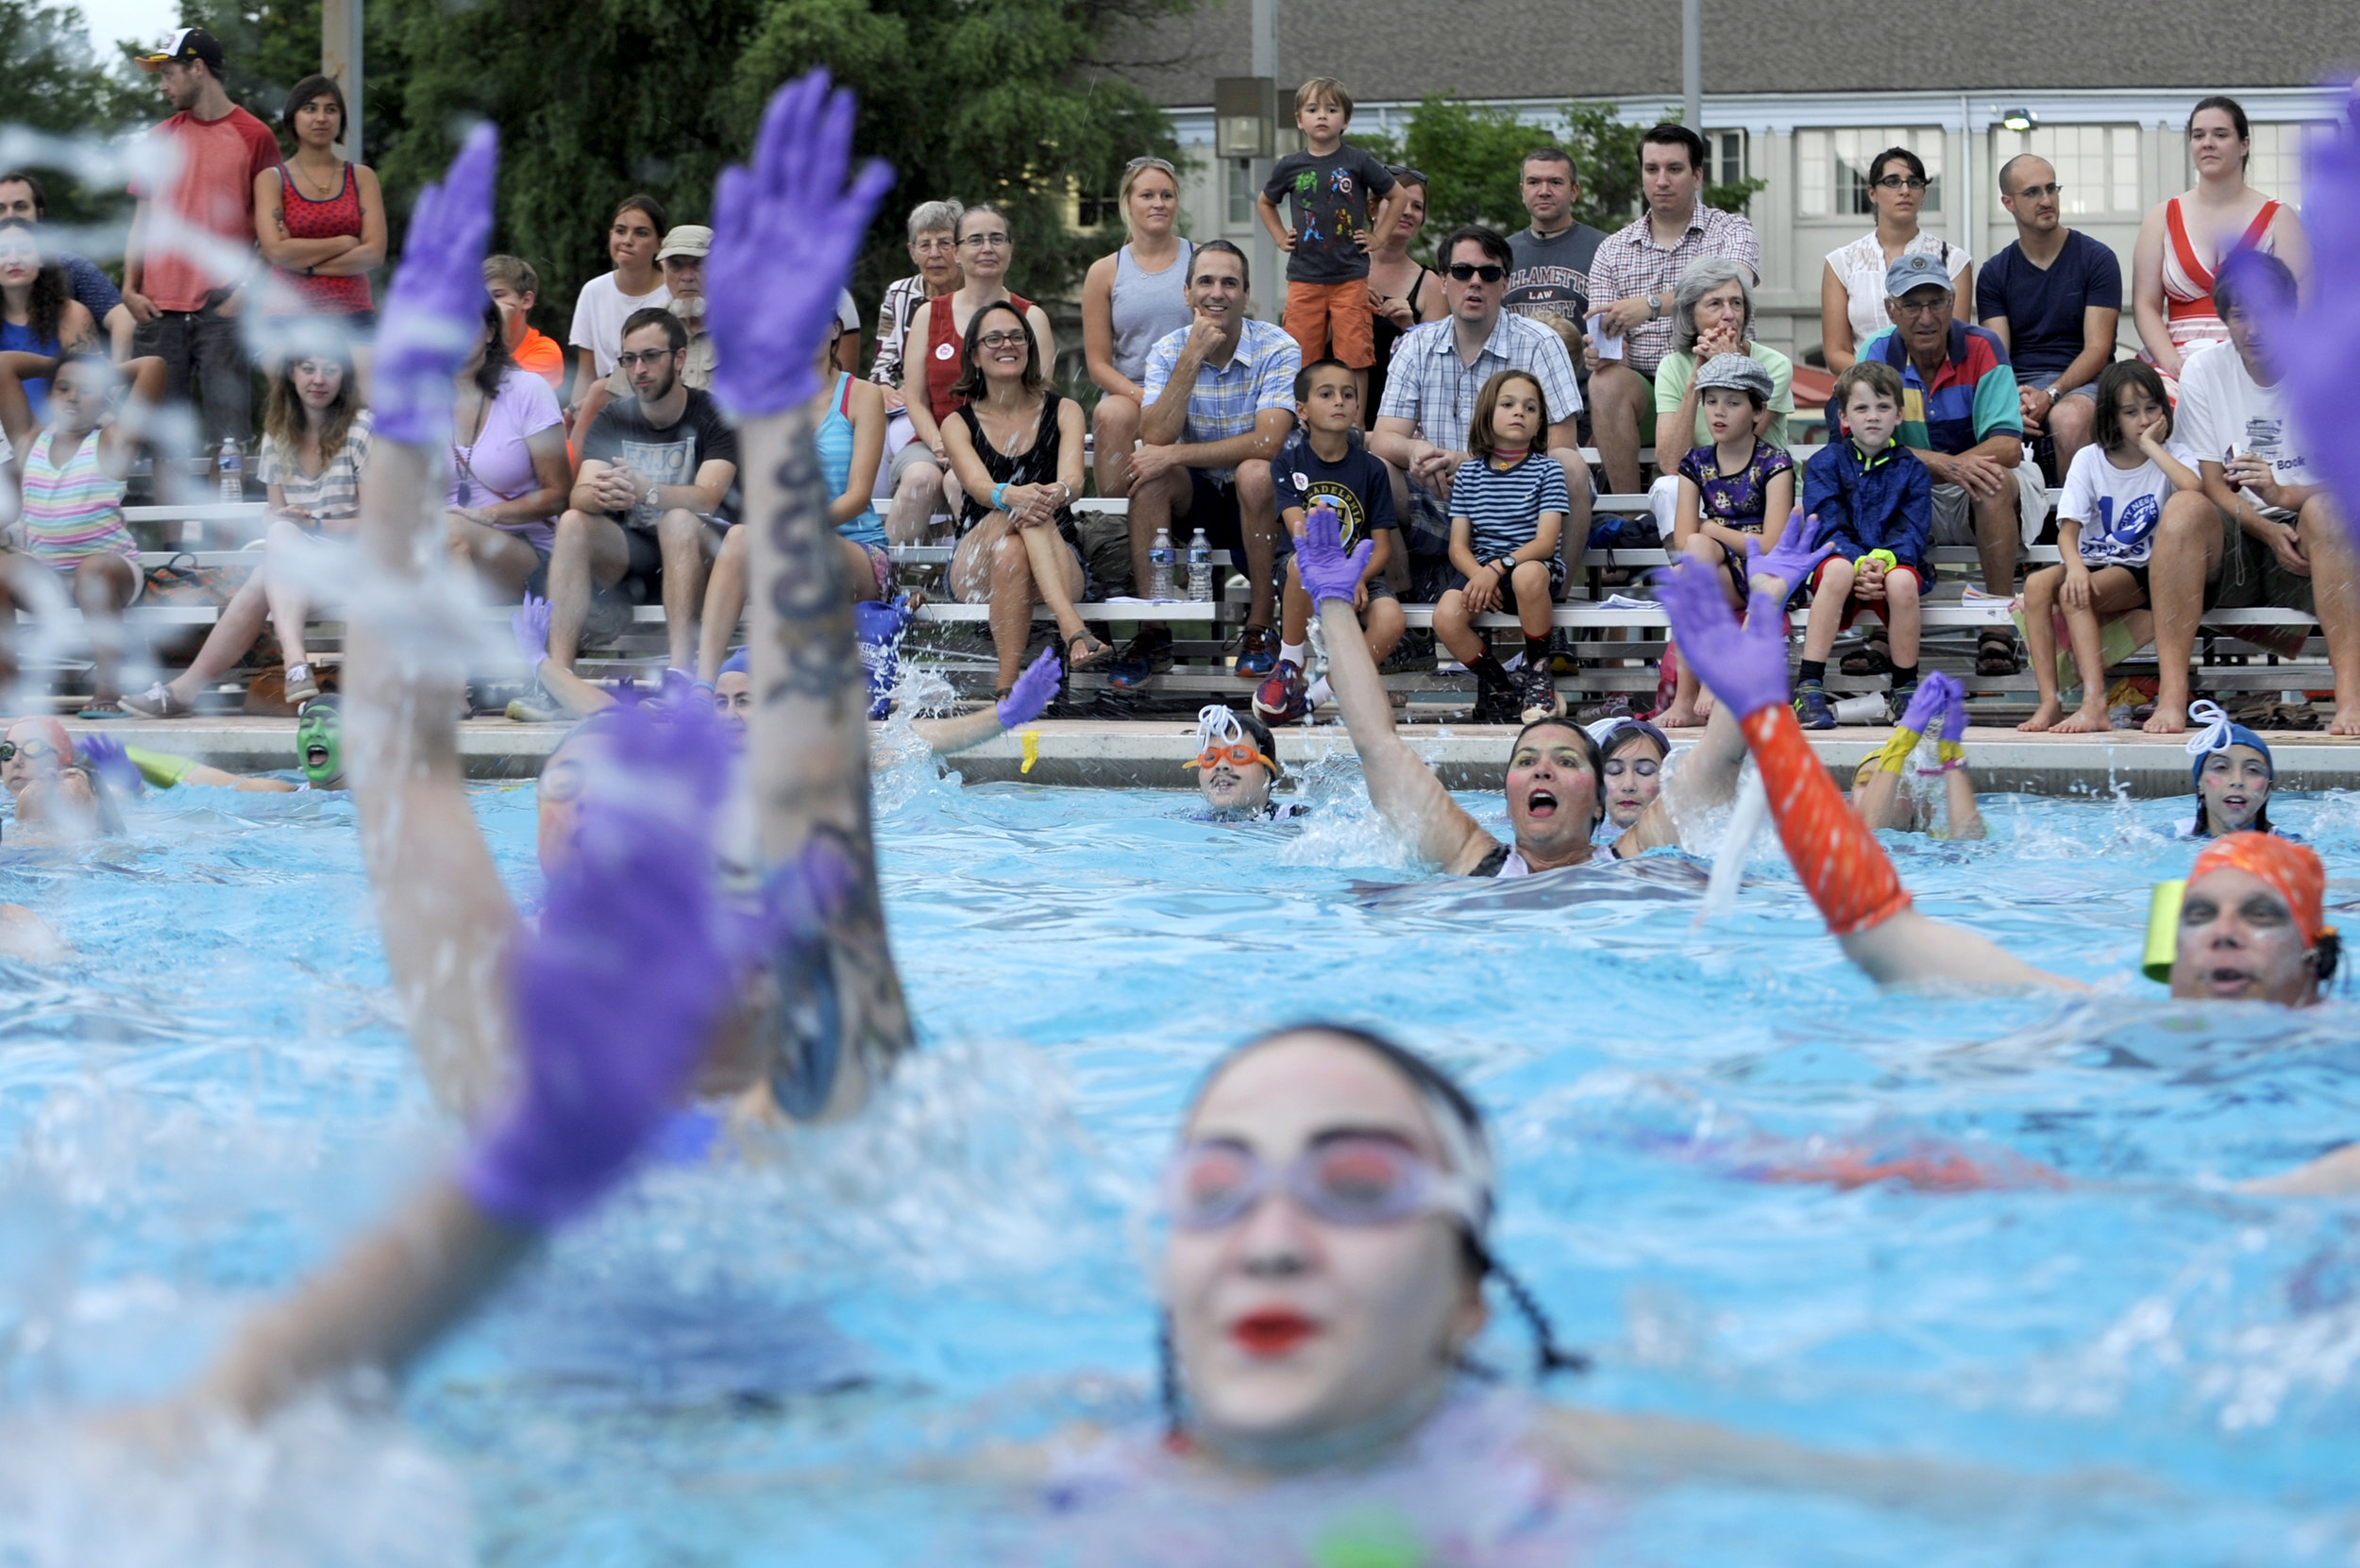  Fluid Movement, a Baltimore-based performance art group known for offbeat water ballets, roller skating musicals and disco workouts, performs its 15th annual synchronized swimming ballet at Druid Park Pool in Baltimore, Maryland on Saturday, July 30